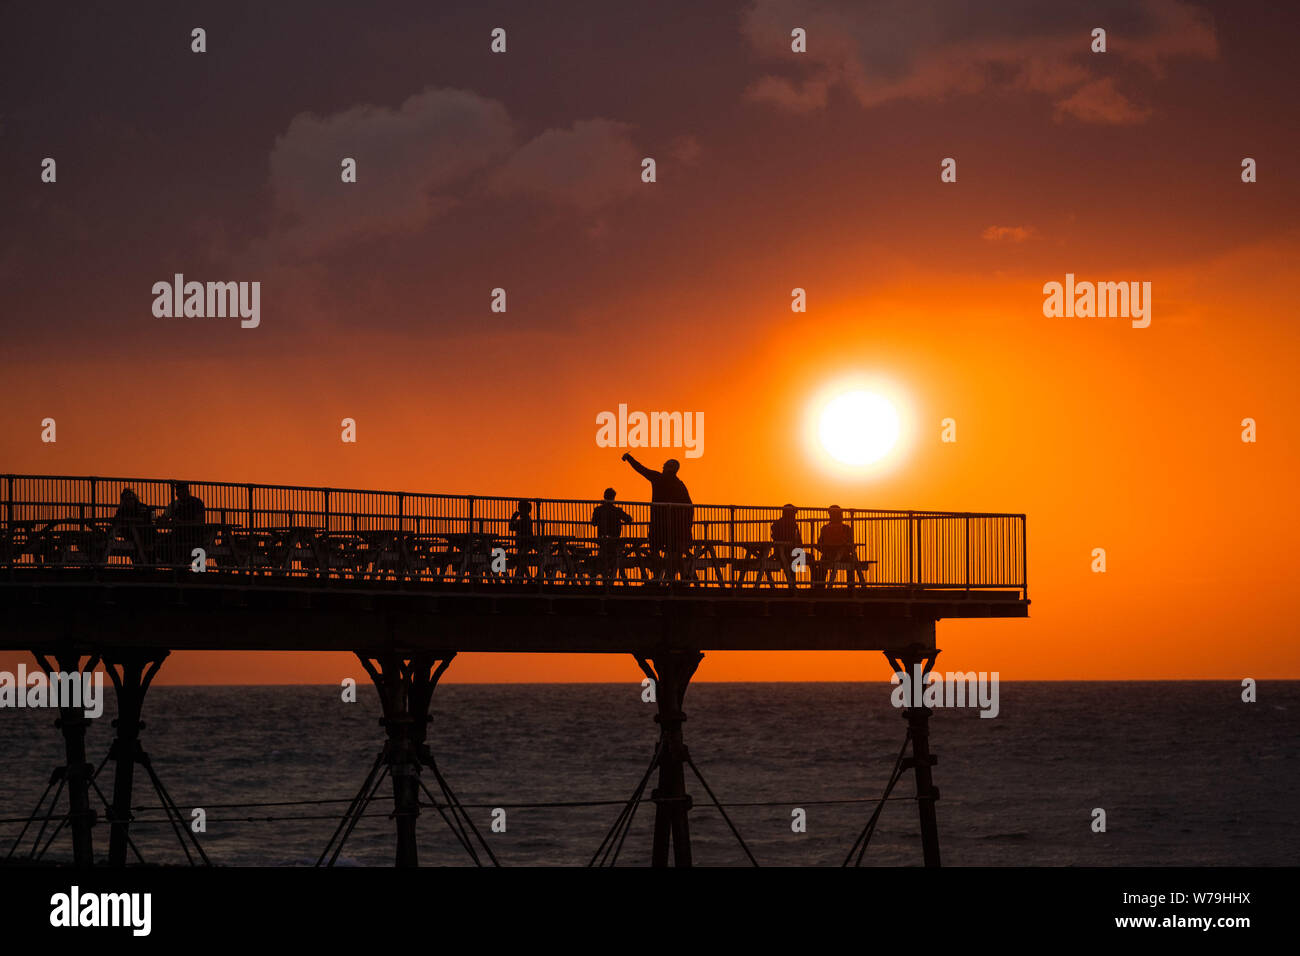 Aberystwyth, Wales, UK. 5th Aug 2019.  People on the Royal Pier in Aberystwyth are silhouetted as they watch the fiery sunset at the end of a breezy but bright August day. The weather is forecast to become more unsettled towards the weekend, with outbreaks of rain in many places  Photo credit : Keith Morris/Alamy Live News Stock Photo